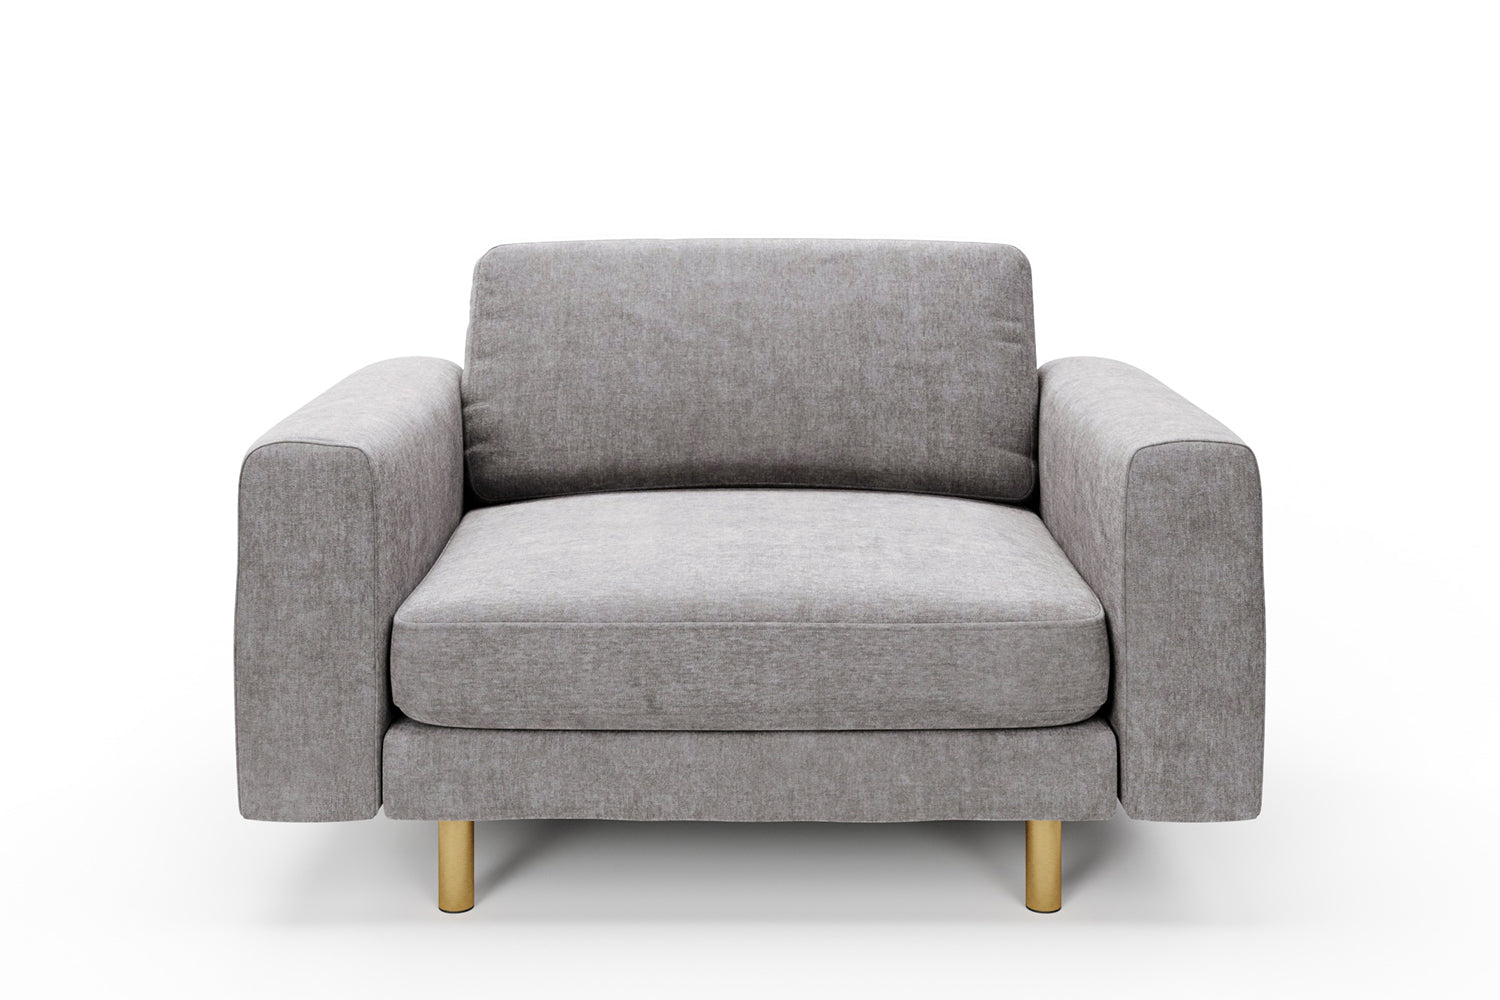 SNUG | The Big Chill 1.5 Seater Snuggler in Mid Grey variant_40414875680816